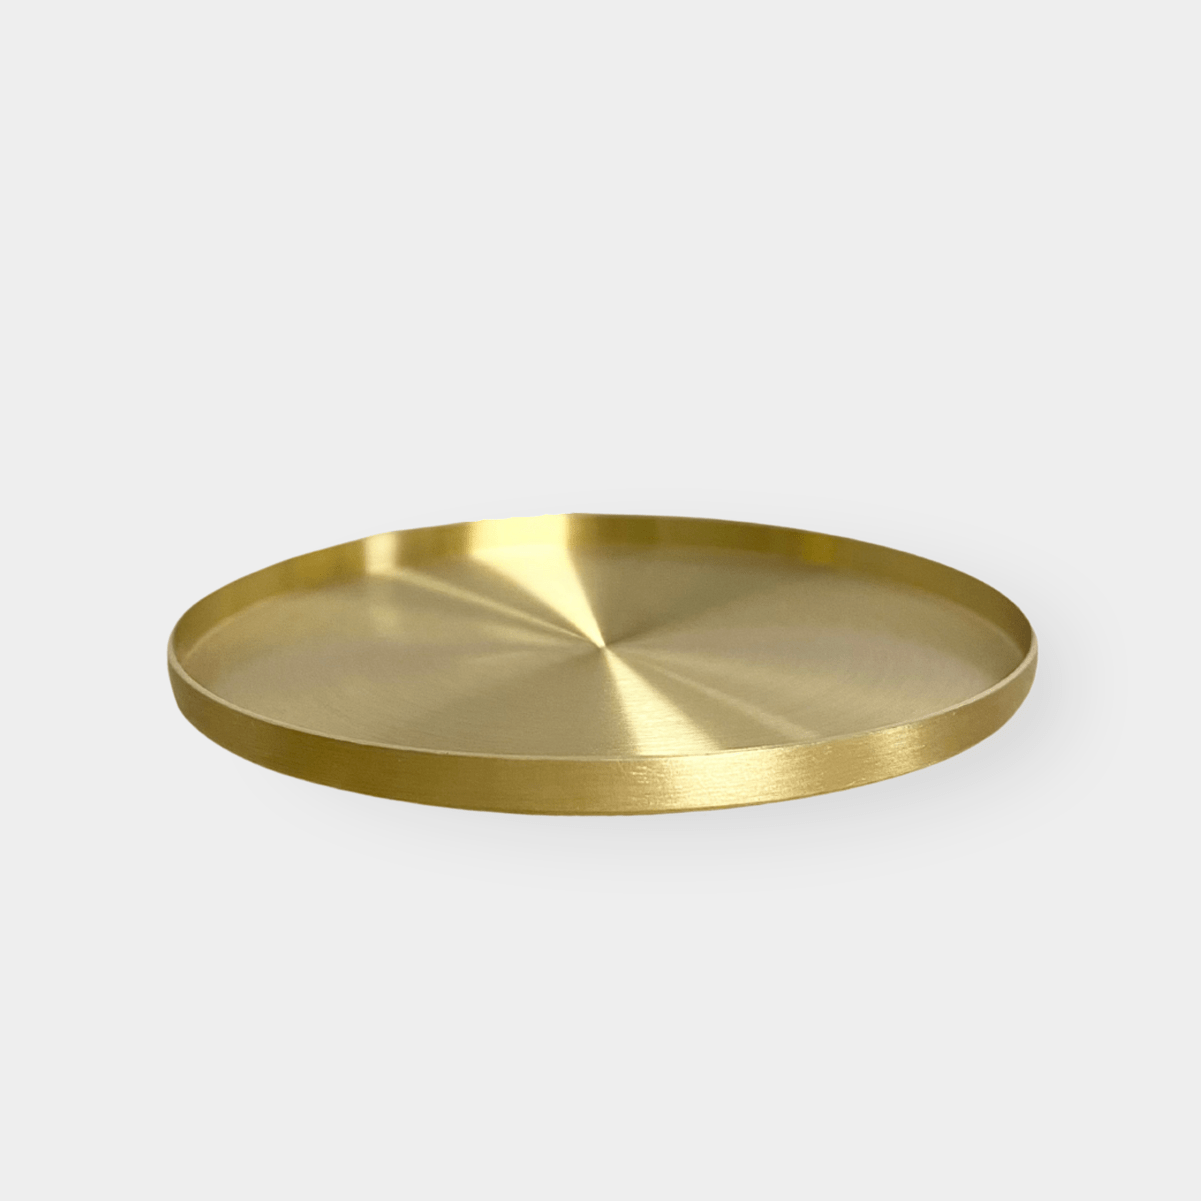 norsuHOME Candle Holders norsuHOME Brass Candle Coaster (7676126462201)